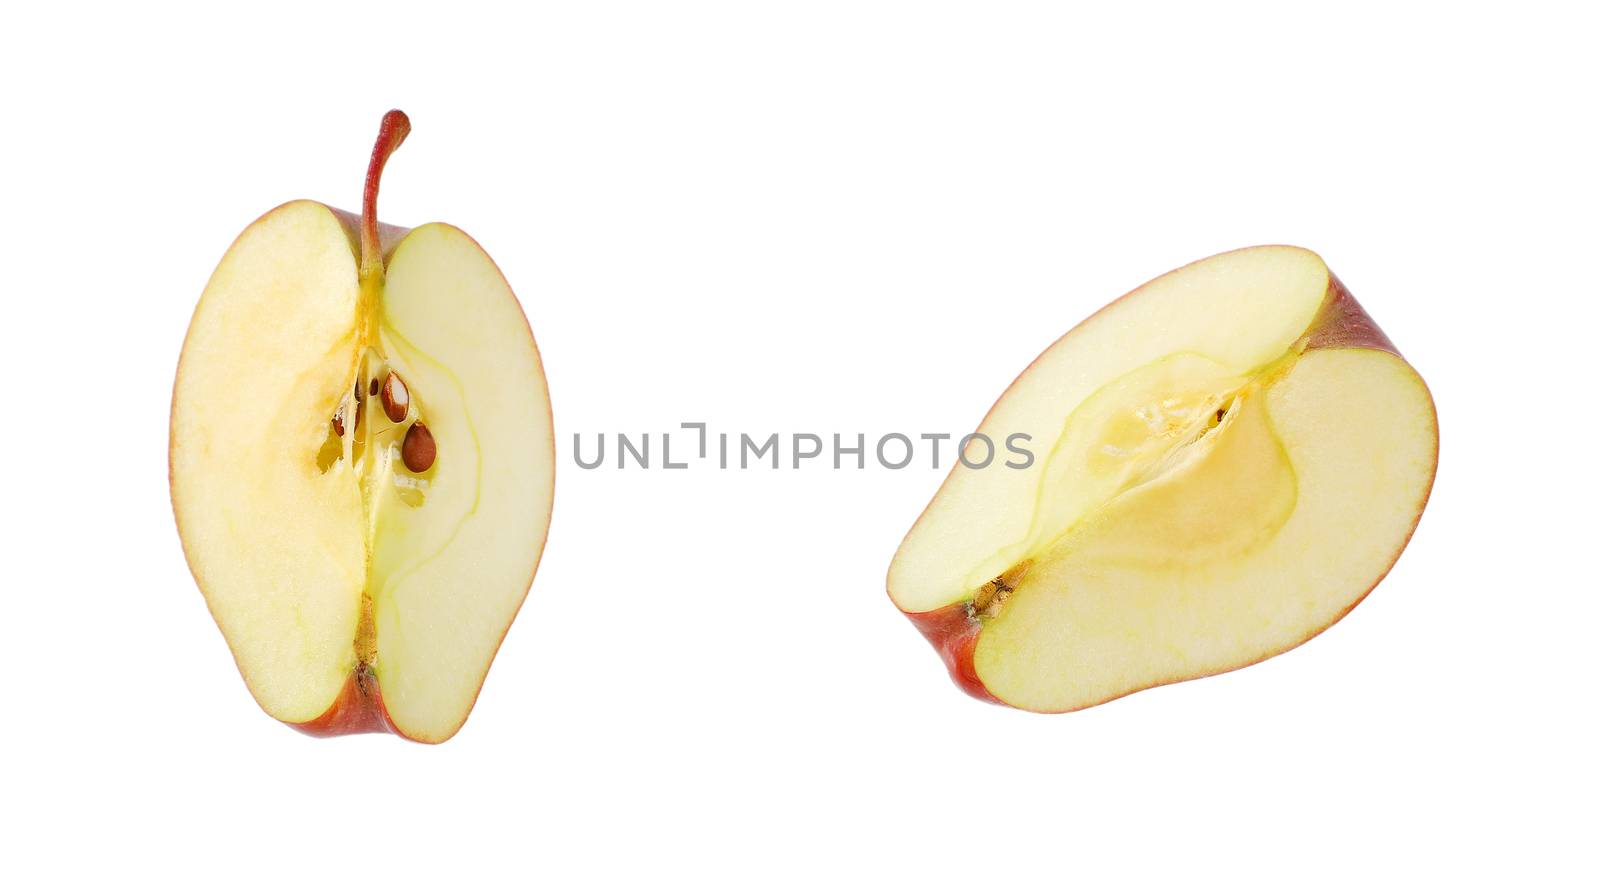 red apple wedges on white background